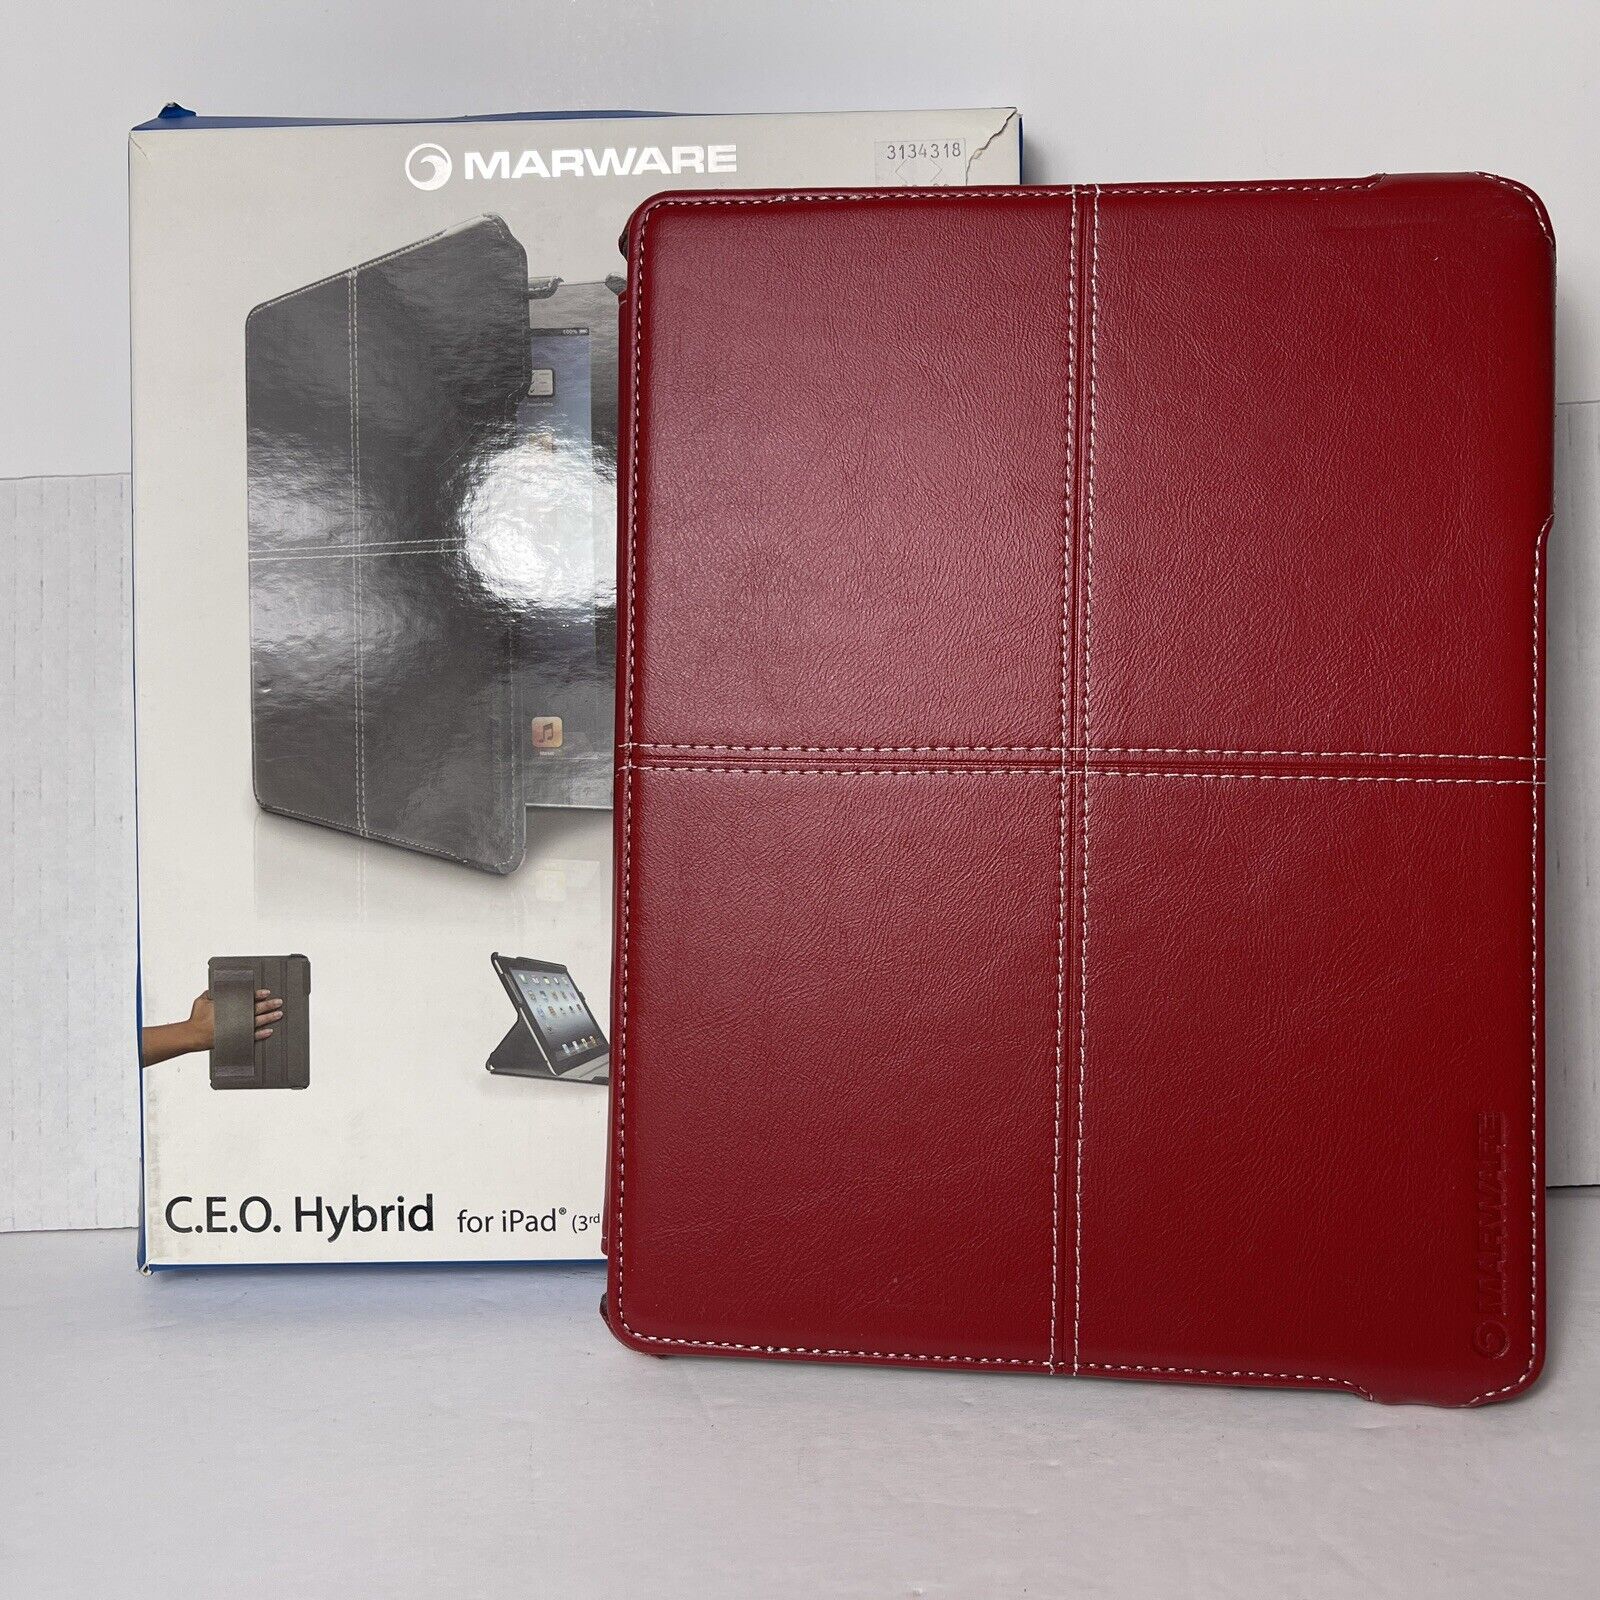 Marware C.E.O. Hybrid Case for iPad 3rd Generation Red Leather New